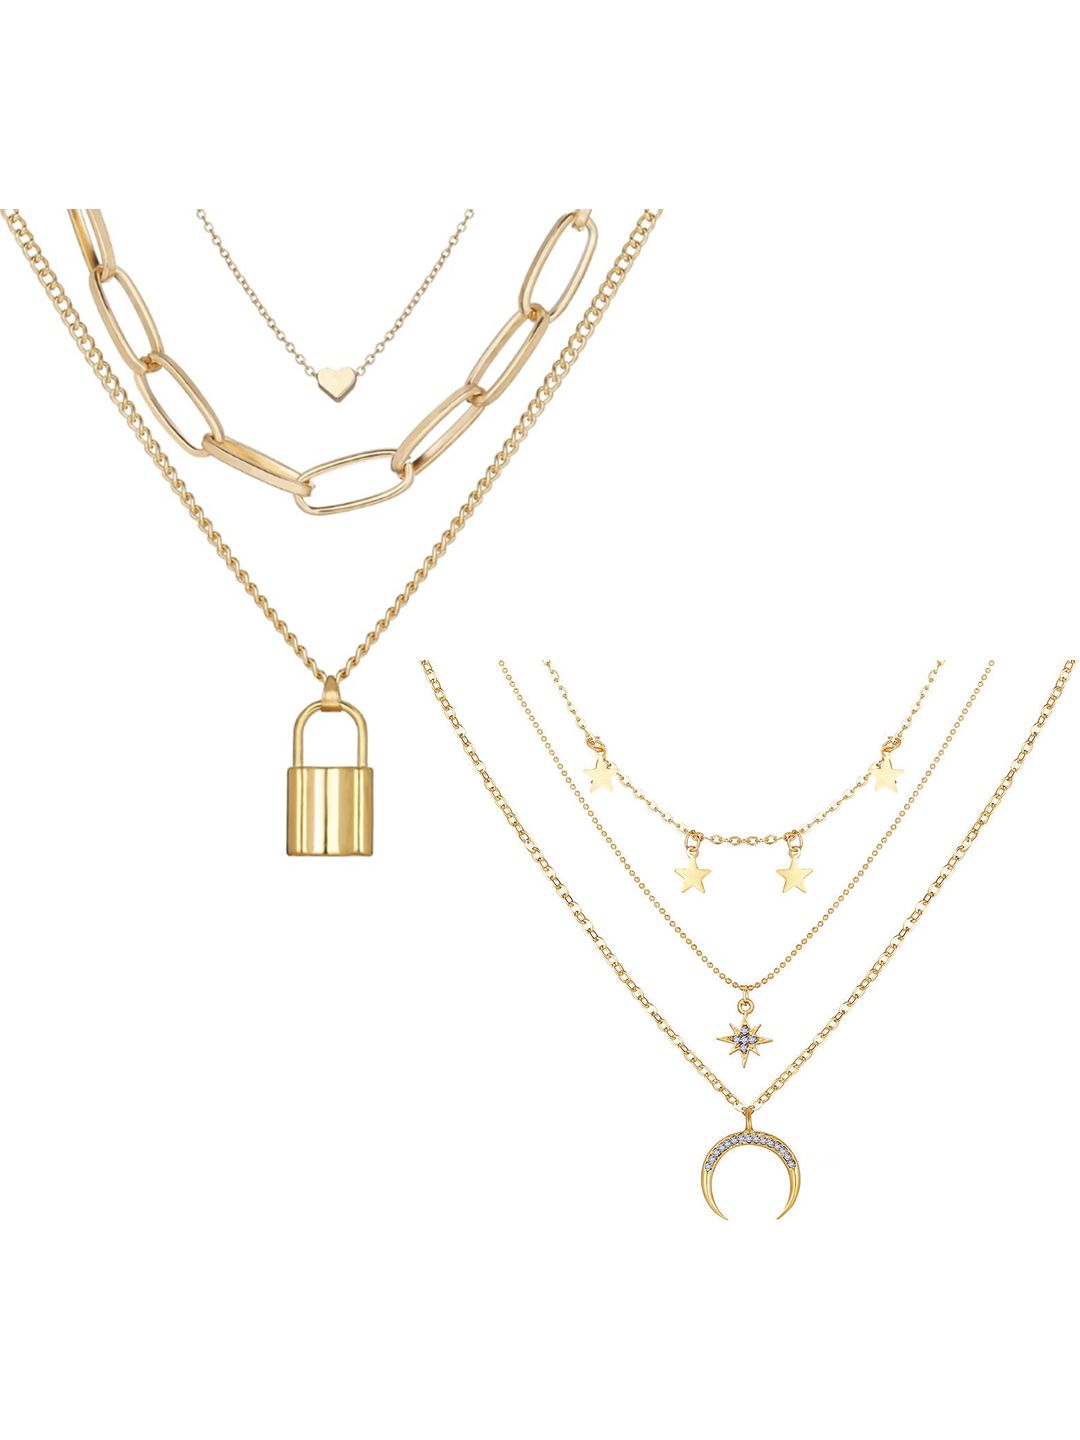 Vembley Set of 2 Gold-Plated Layered Necklace Price in India